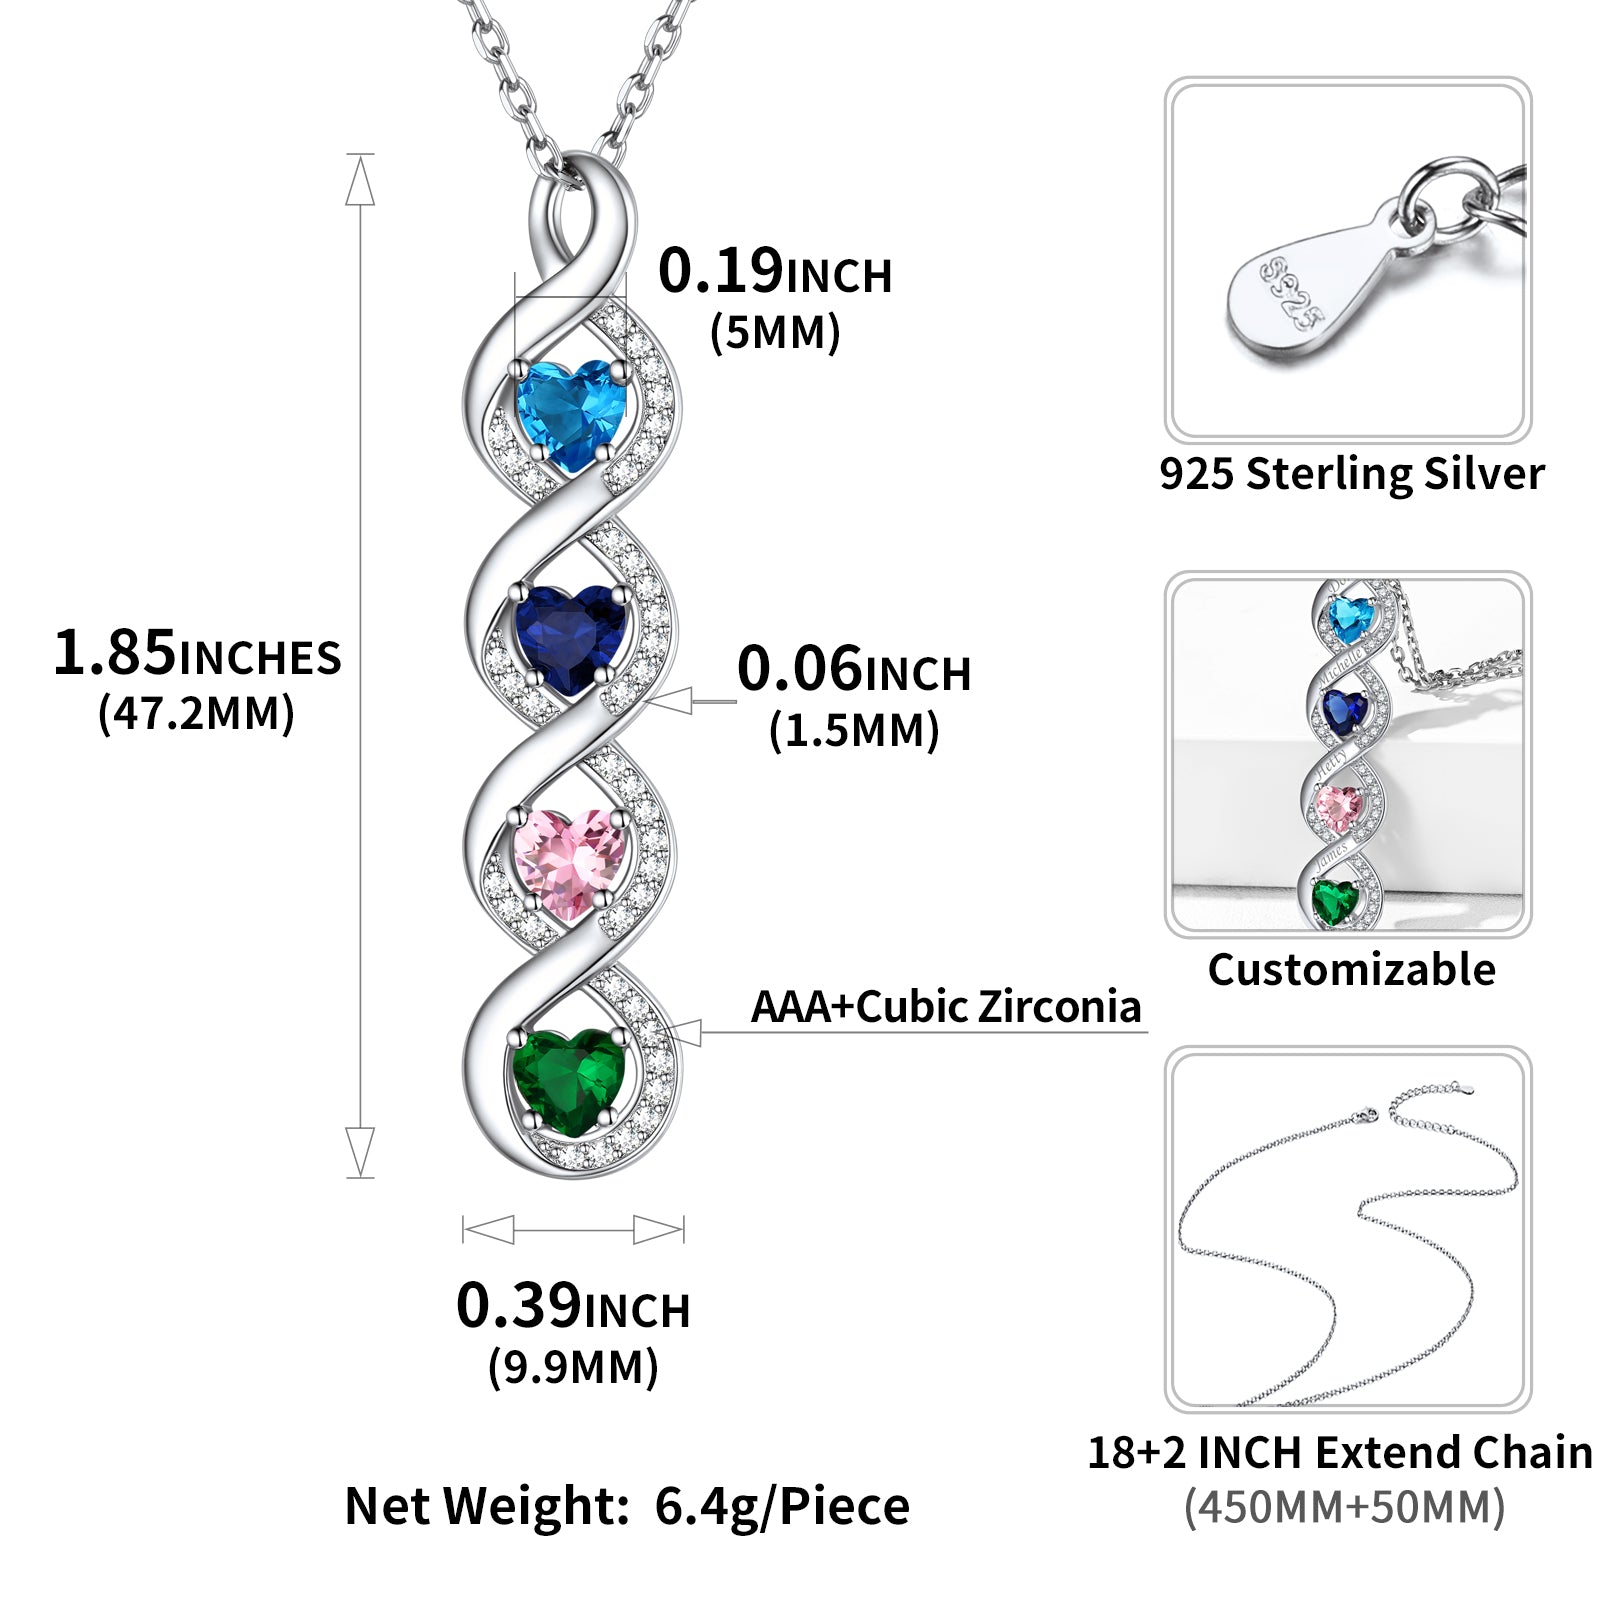 10K Yellow Gold Multi Bezel Set Birthstone Necklace - 2 Stone with  Alexandrite (Simulated) Stones | Birthstone necklace, Necklace, Birthstones